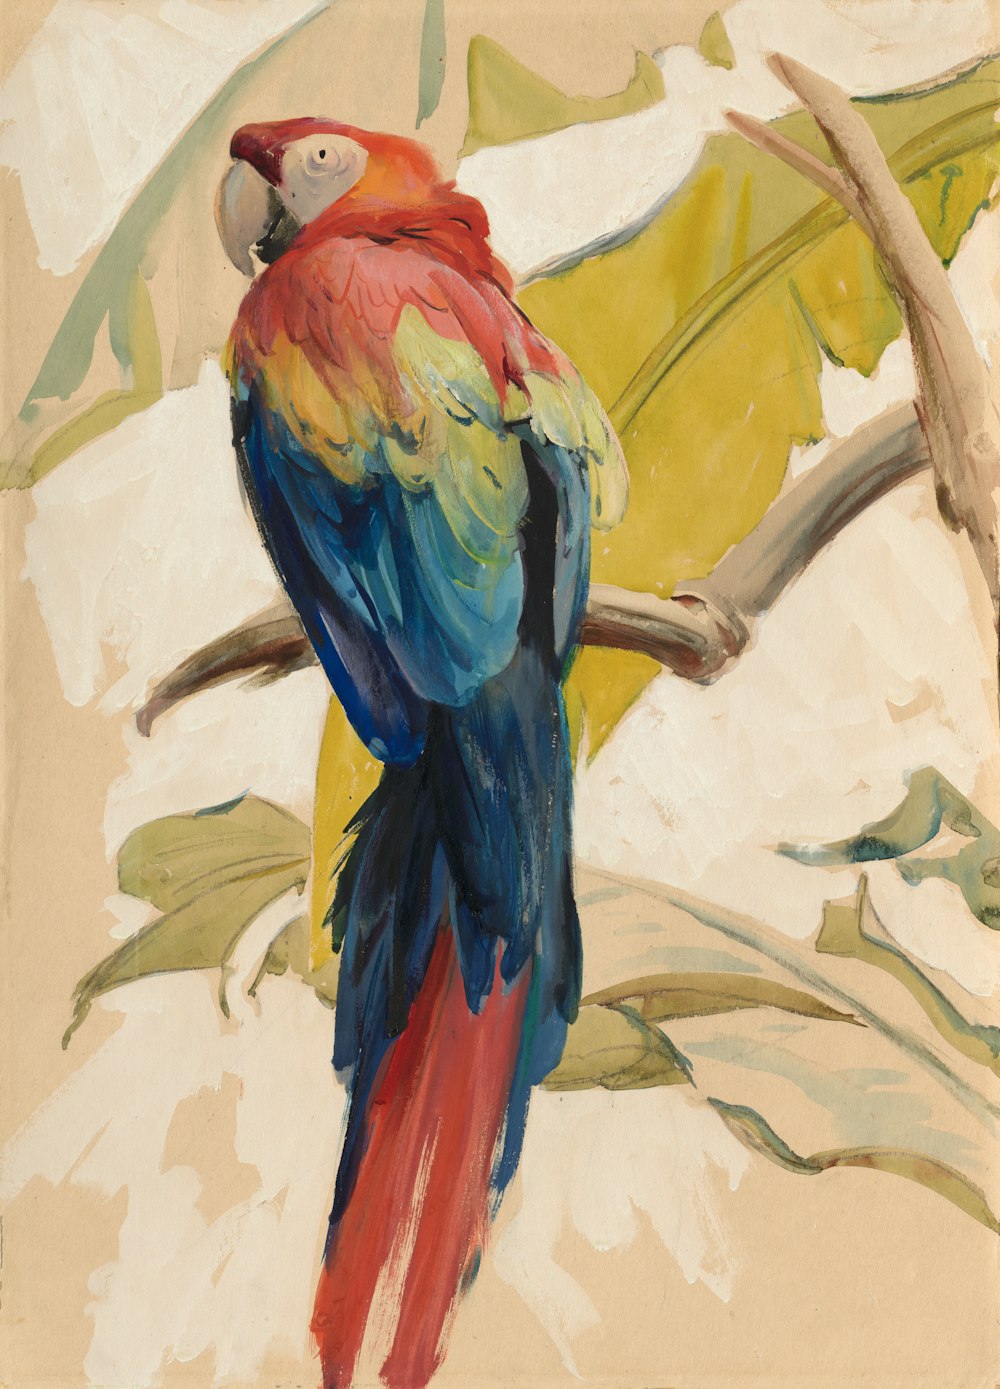 a painting of a colorful bird sitting on a branch